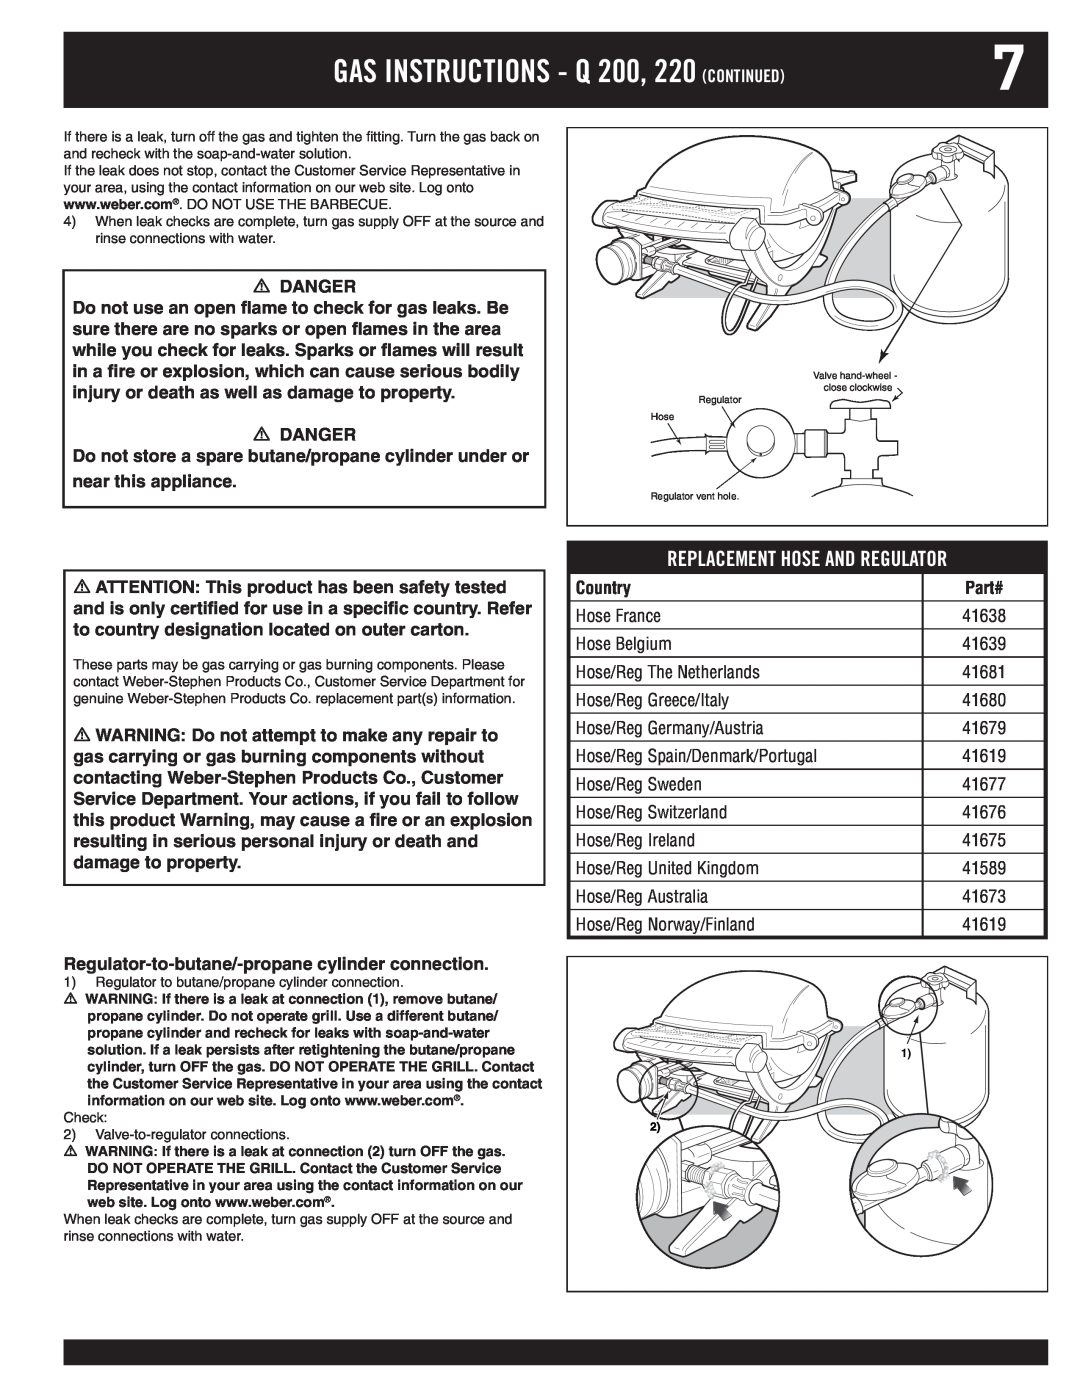 Weber 120, 100 owner manual GAS INSTRUCTIONS - Q 200, 220 CONTINUED, Replacement Hose and Regulator 